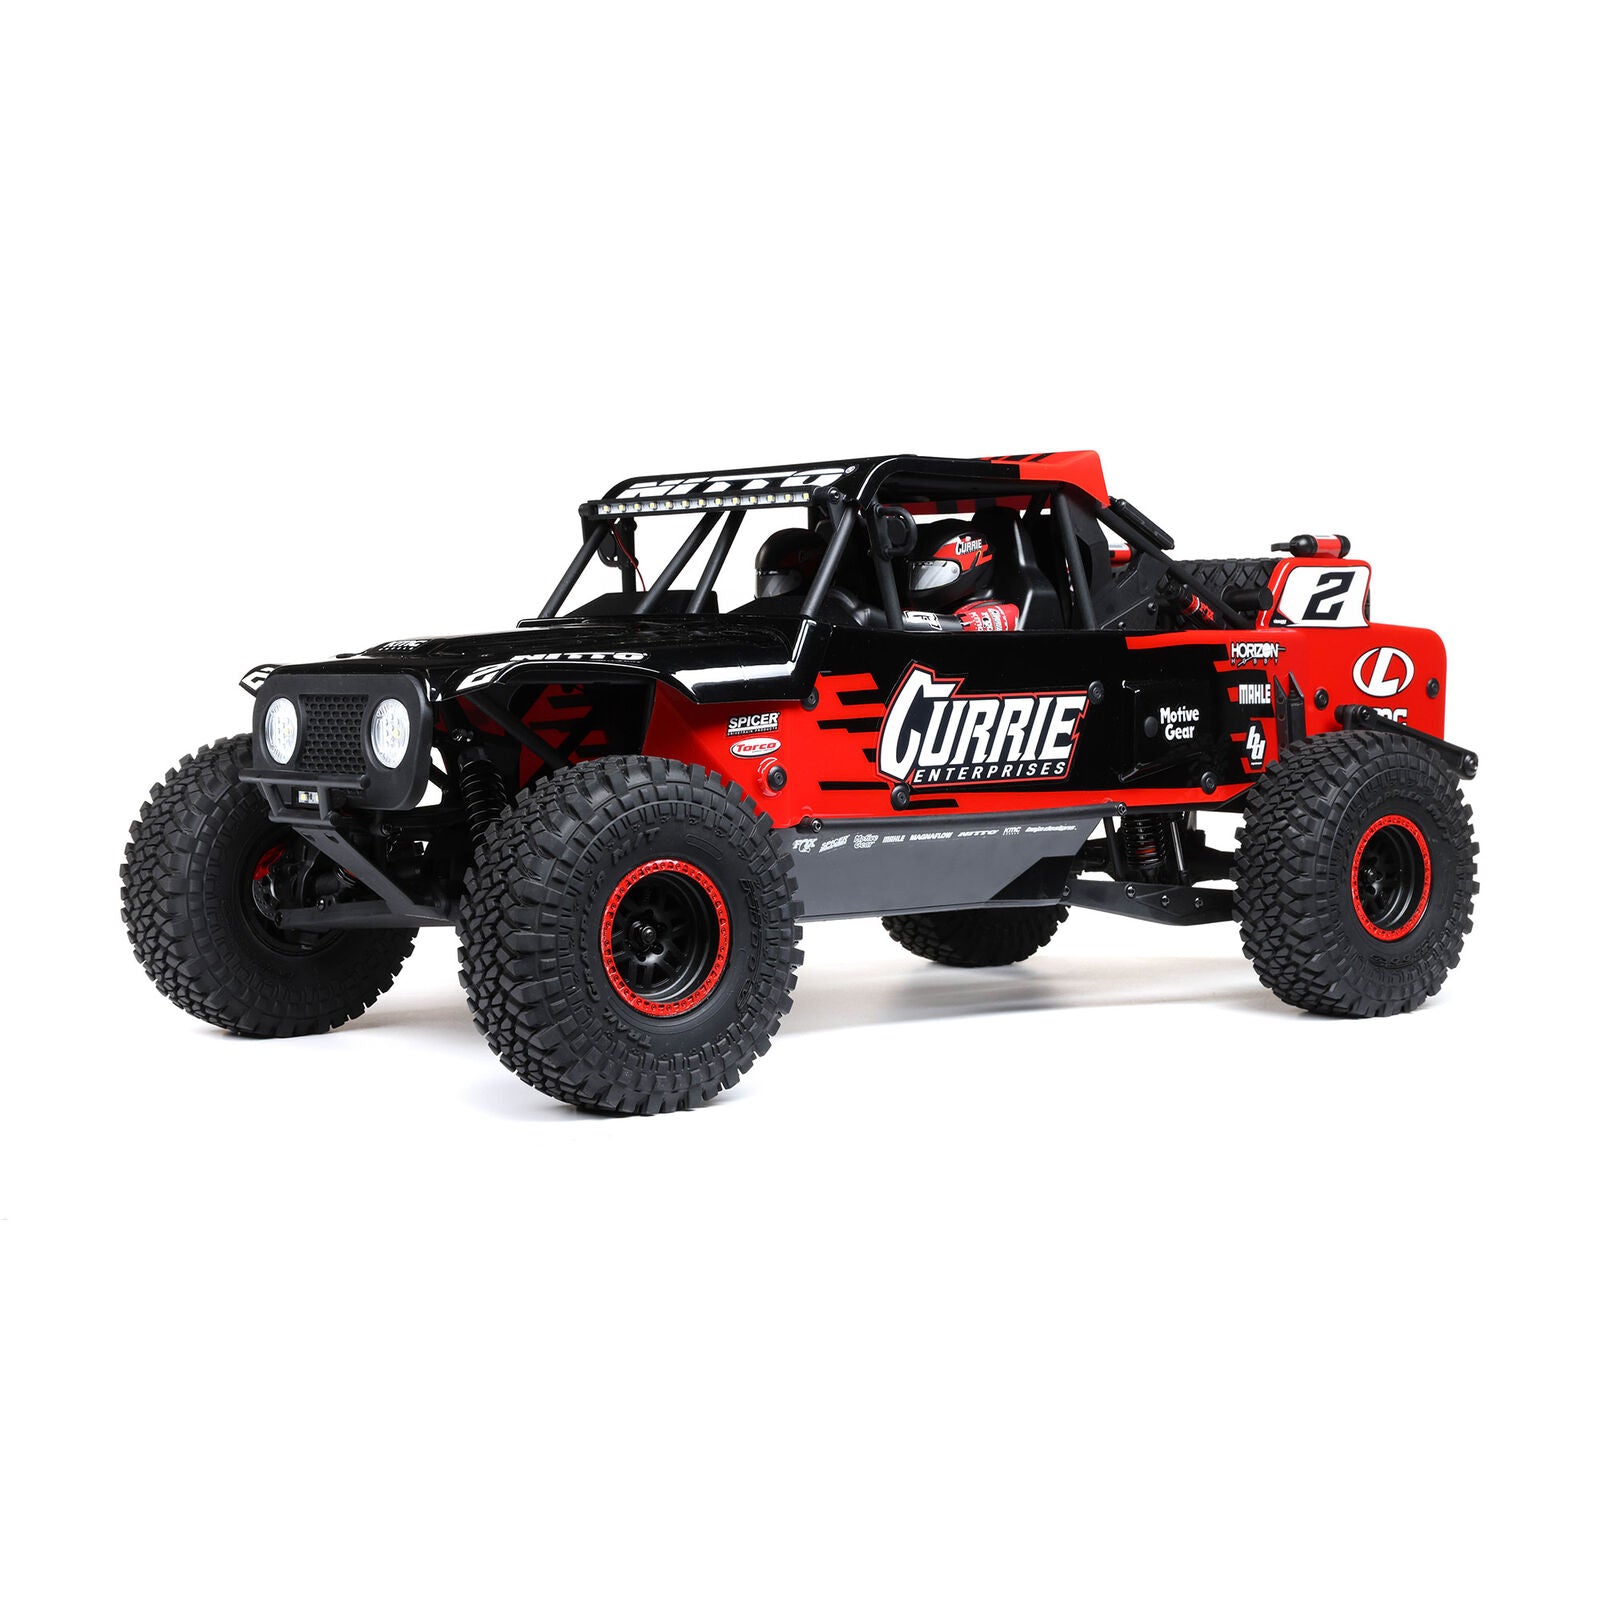 LOSI LOS03030 1/10 Hammer Rey U4 4WD Rock Racer Brushless RTR with Smart and AVC